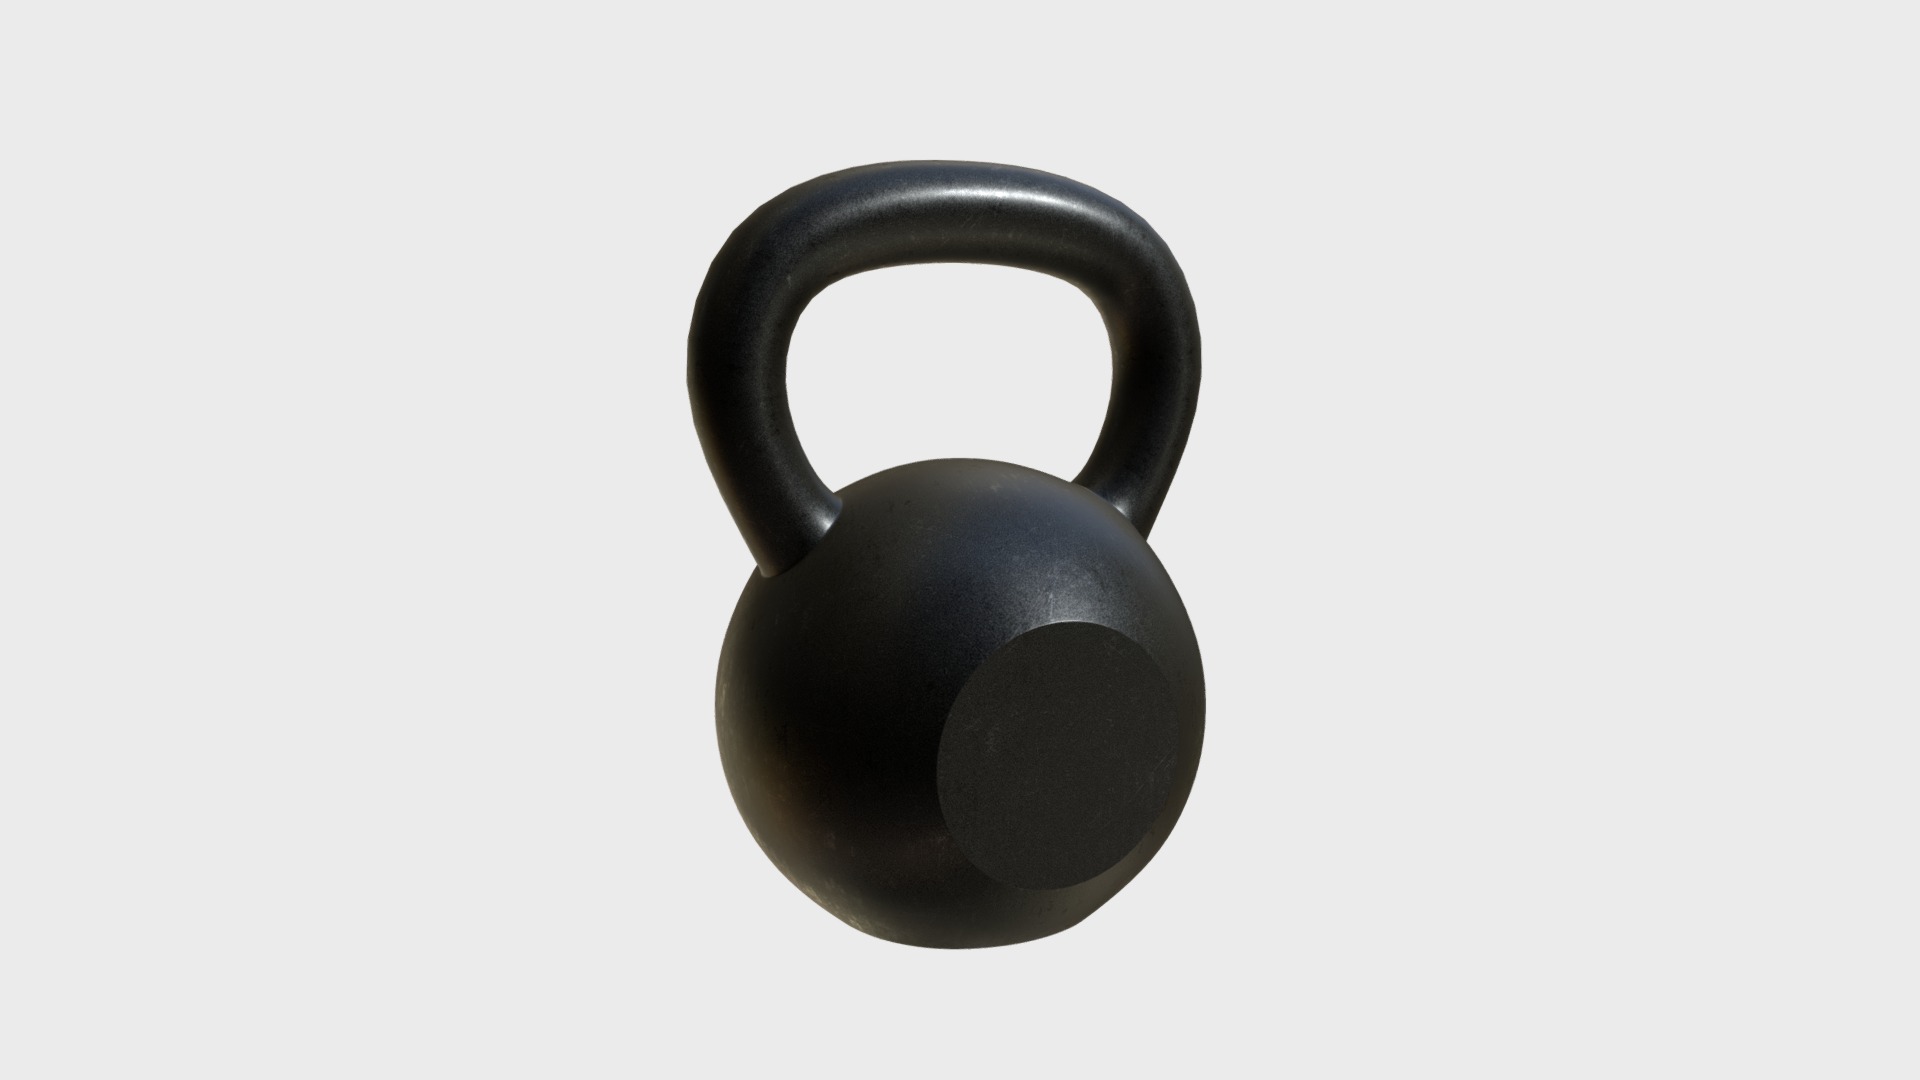 3D model Kettlebell gym equipment - This is a 3D model of the Kettlebell gym equipment. The 3D model is about a black and silver handle.